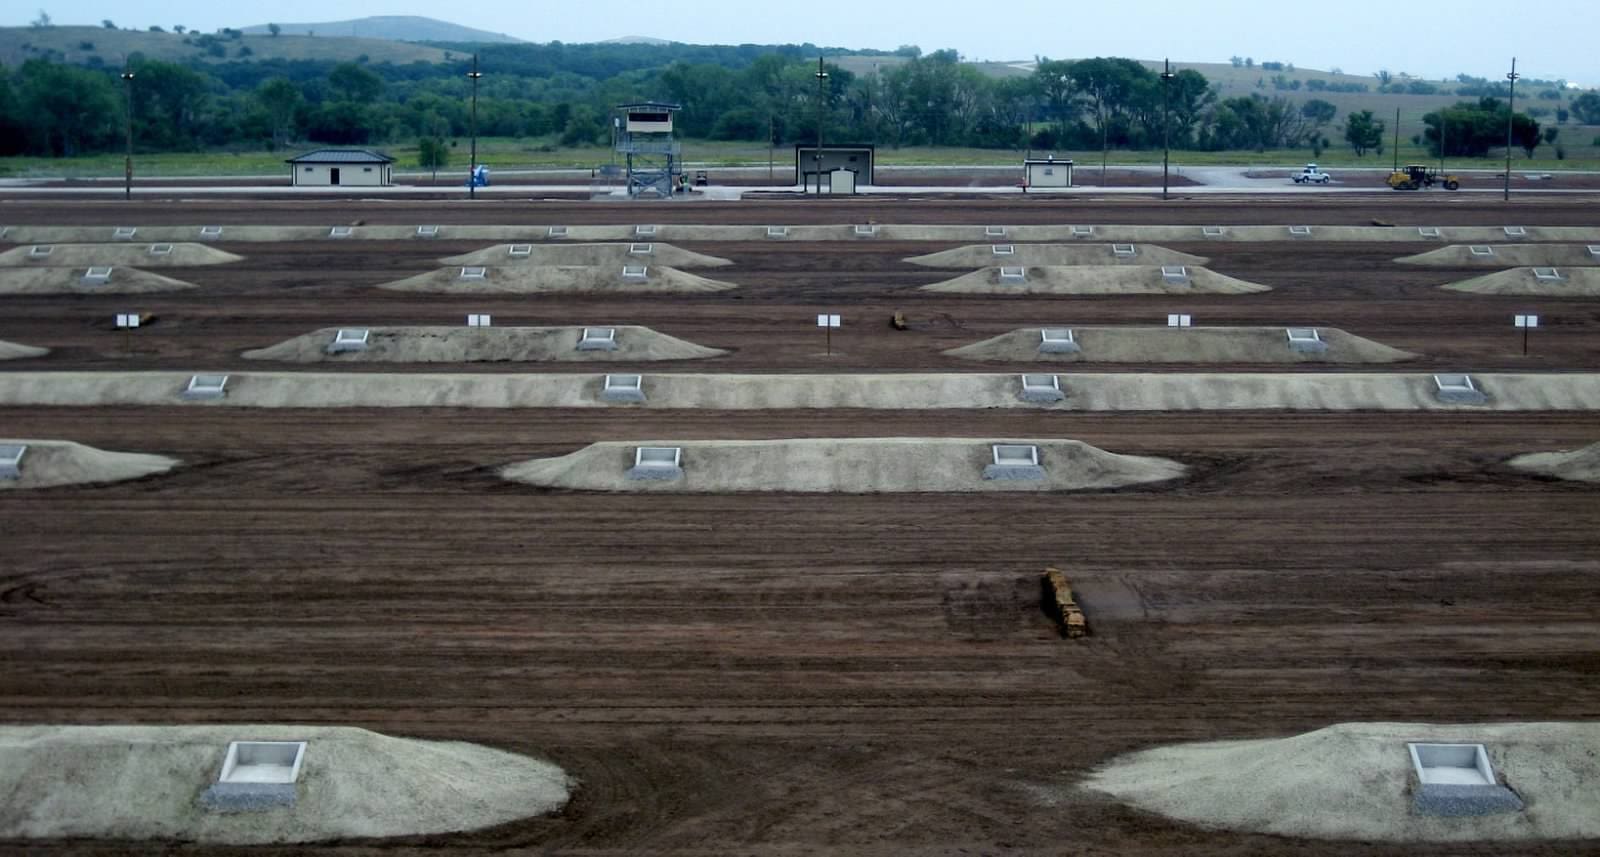 An aerial view of a large outdoor motocross track with starting gates and dirt trails.